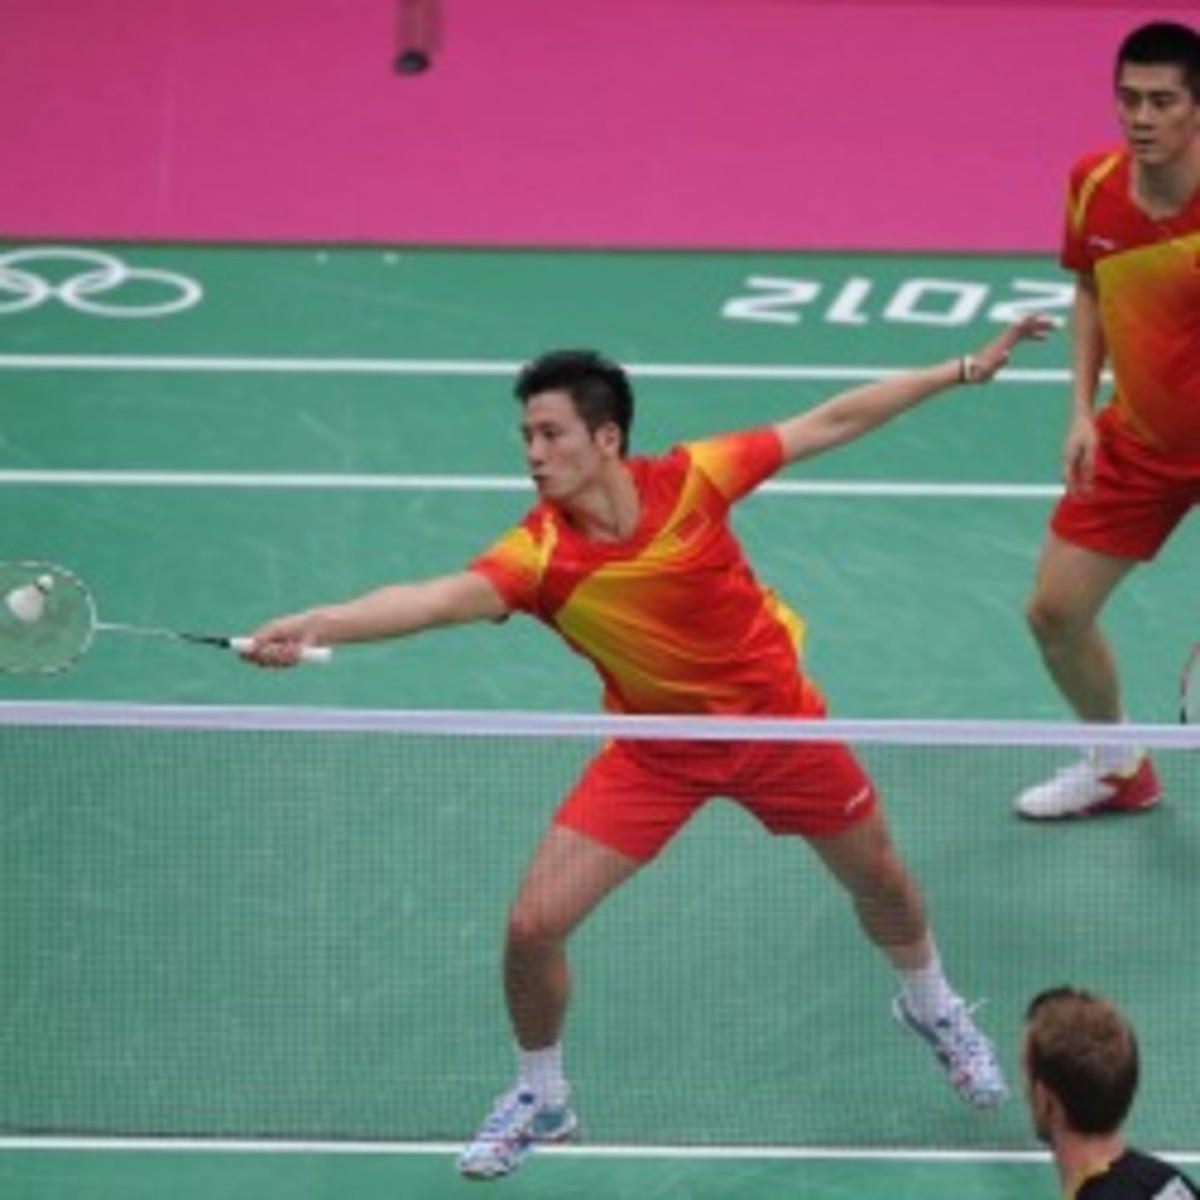 Badminton could be on its way out as an Olympic sport. (Michael Regan/Getty Images)